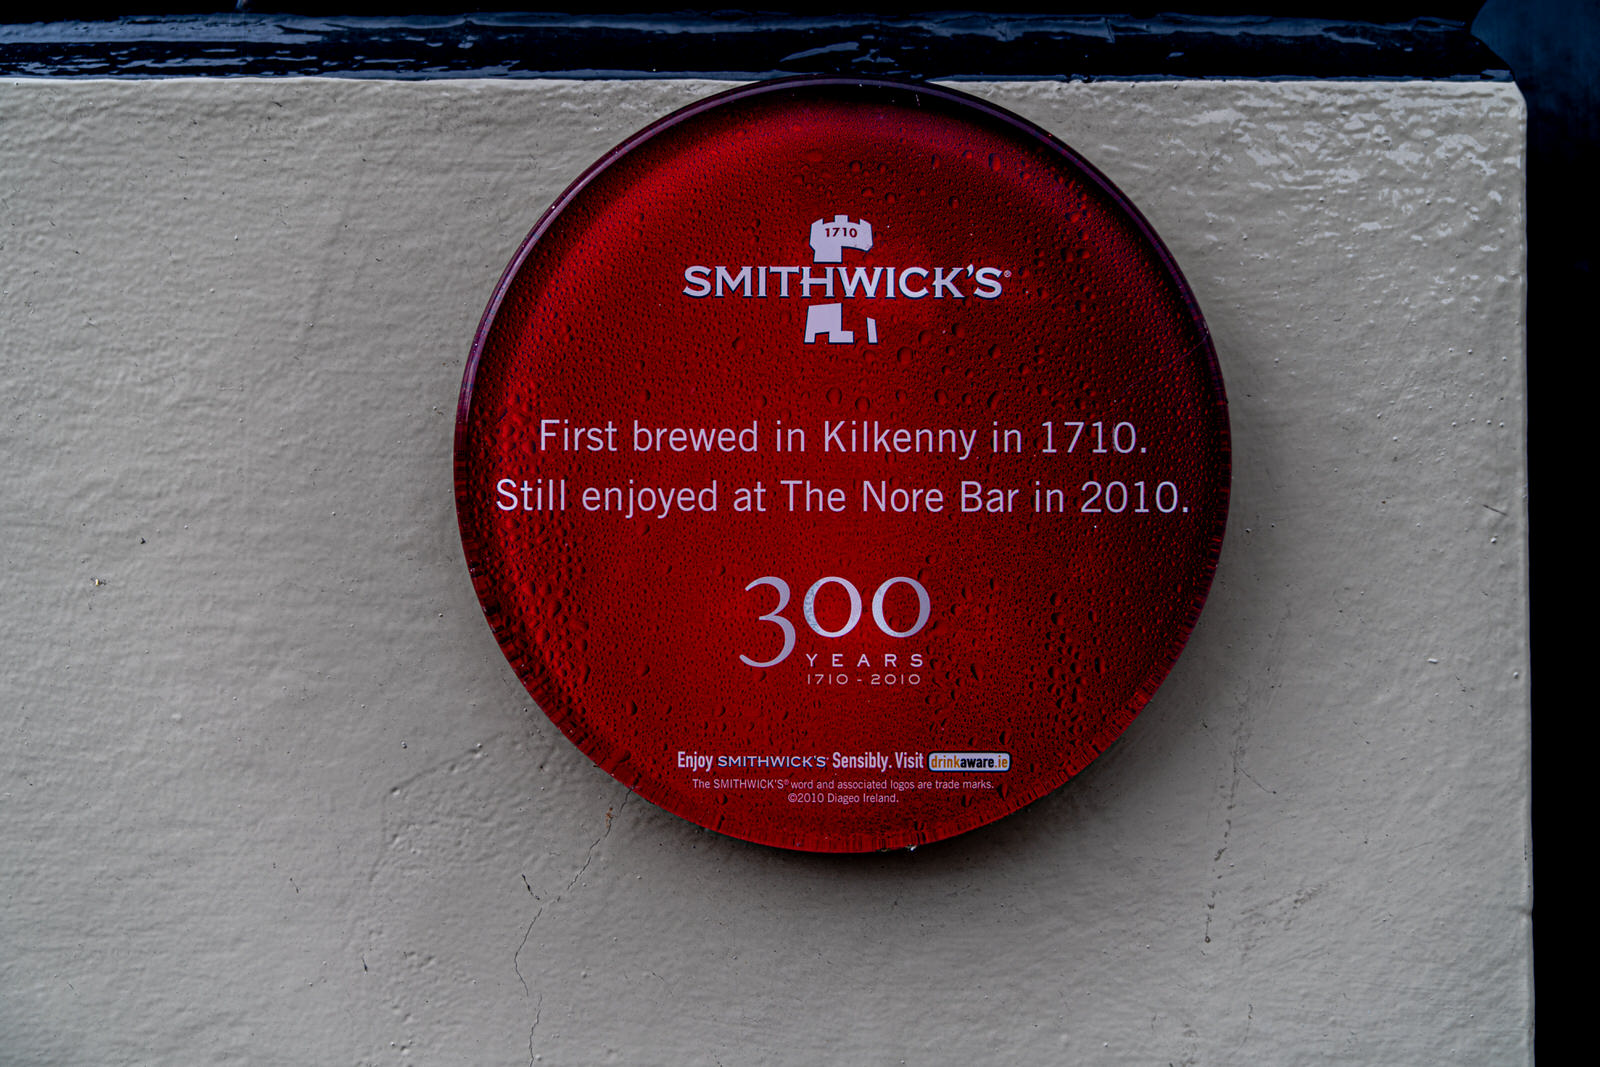  Smithwick's brewery was founded in Kilkenny in 1710 by John Smithwick and run by the Smithwick family of Kilkenny until 1965 